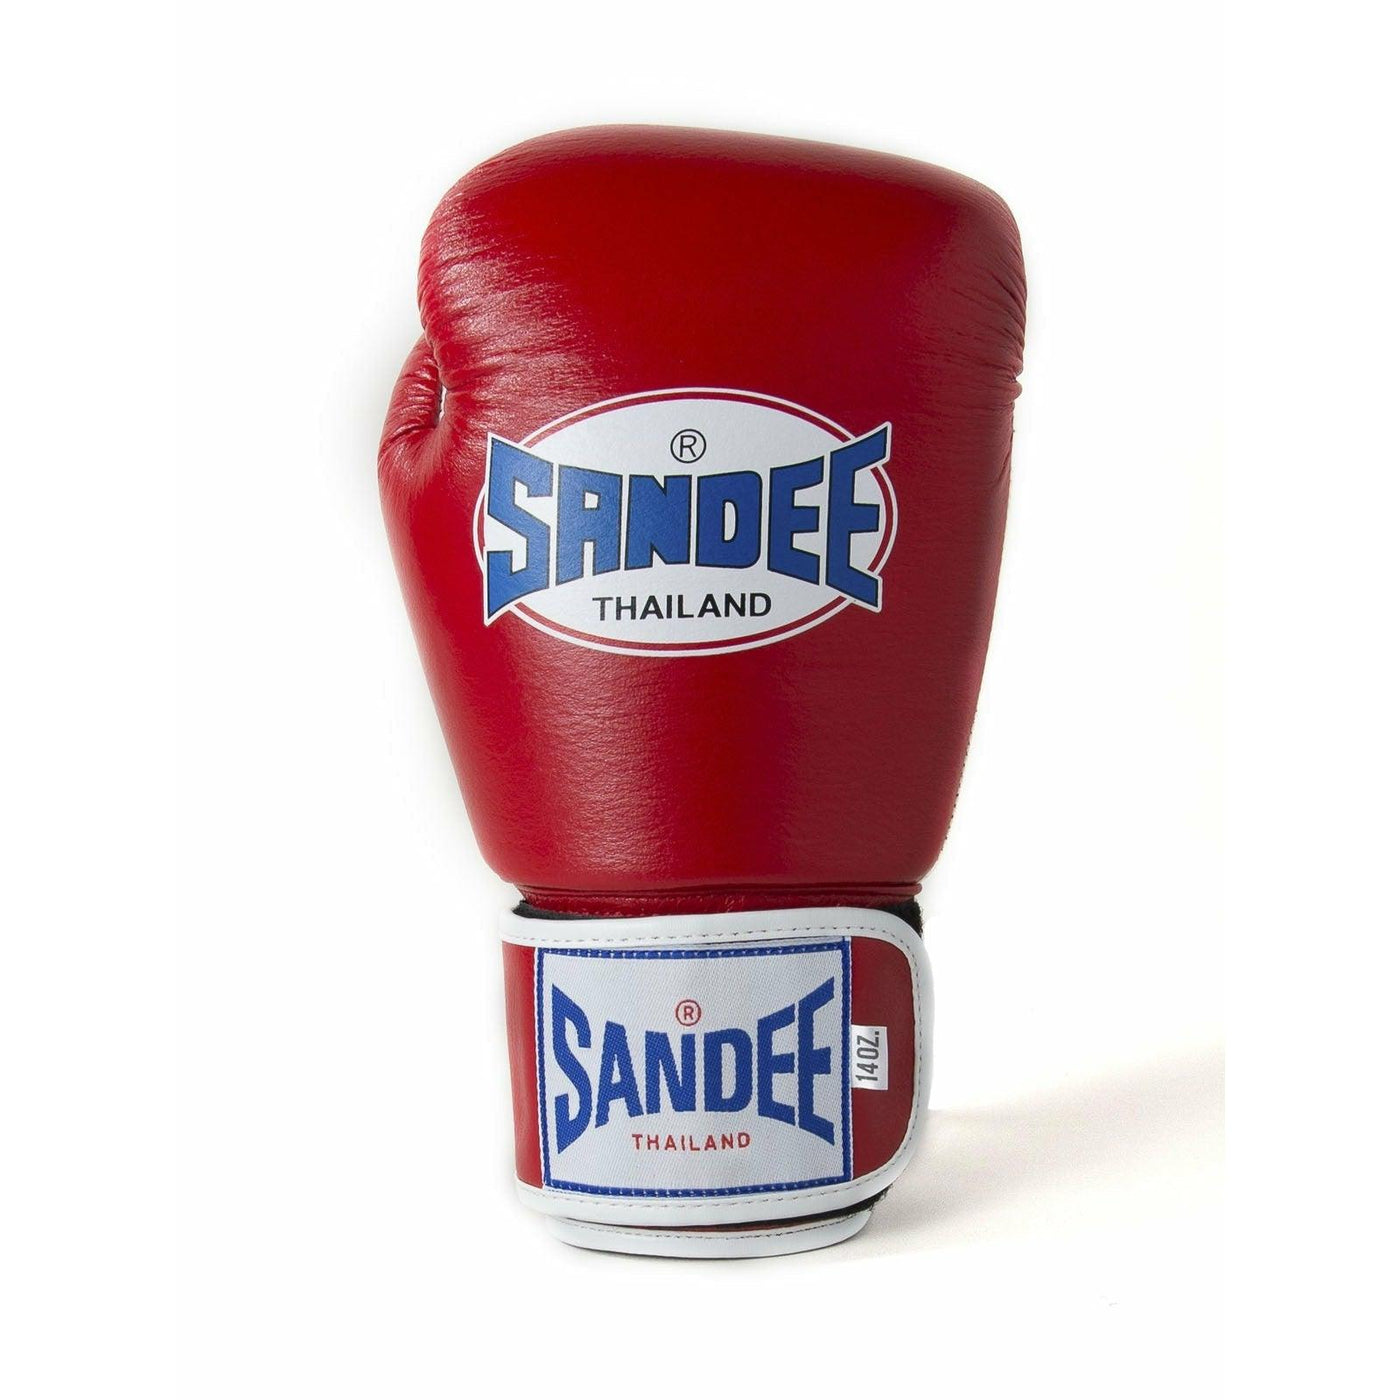 Sandee Two-Tone Gloves - Red/White - Muay Thailand